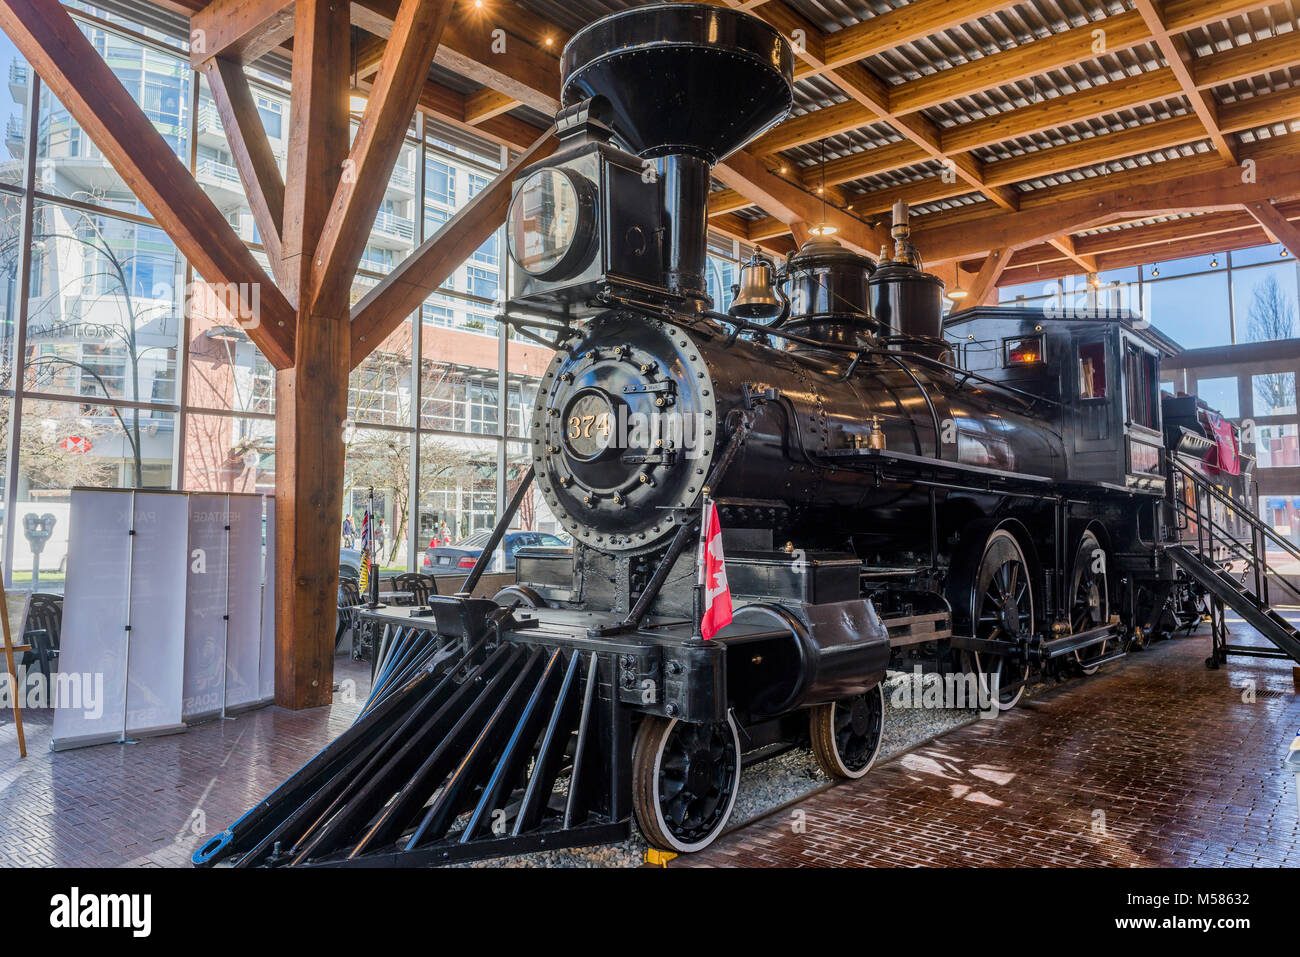 C.P.R Locomotive 374 on display in the Roundhouse, Yaletown, Vancouver, British Columbia, Canada. Stock Photo